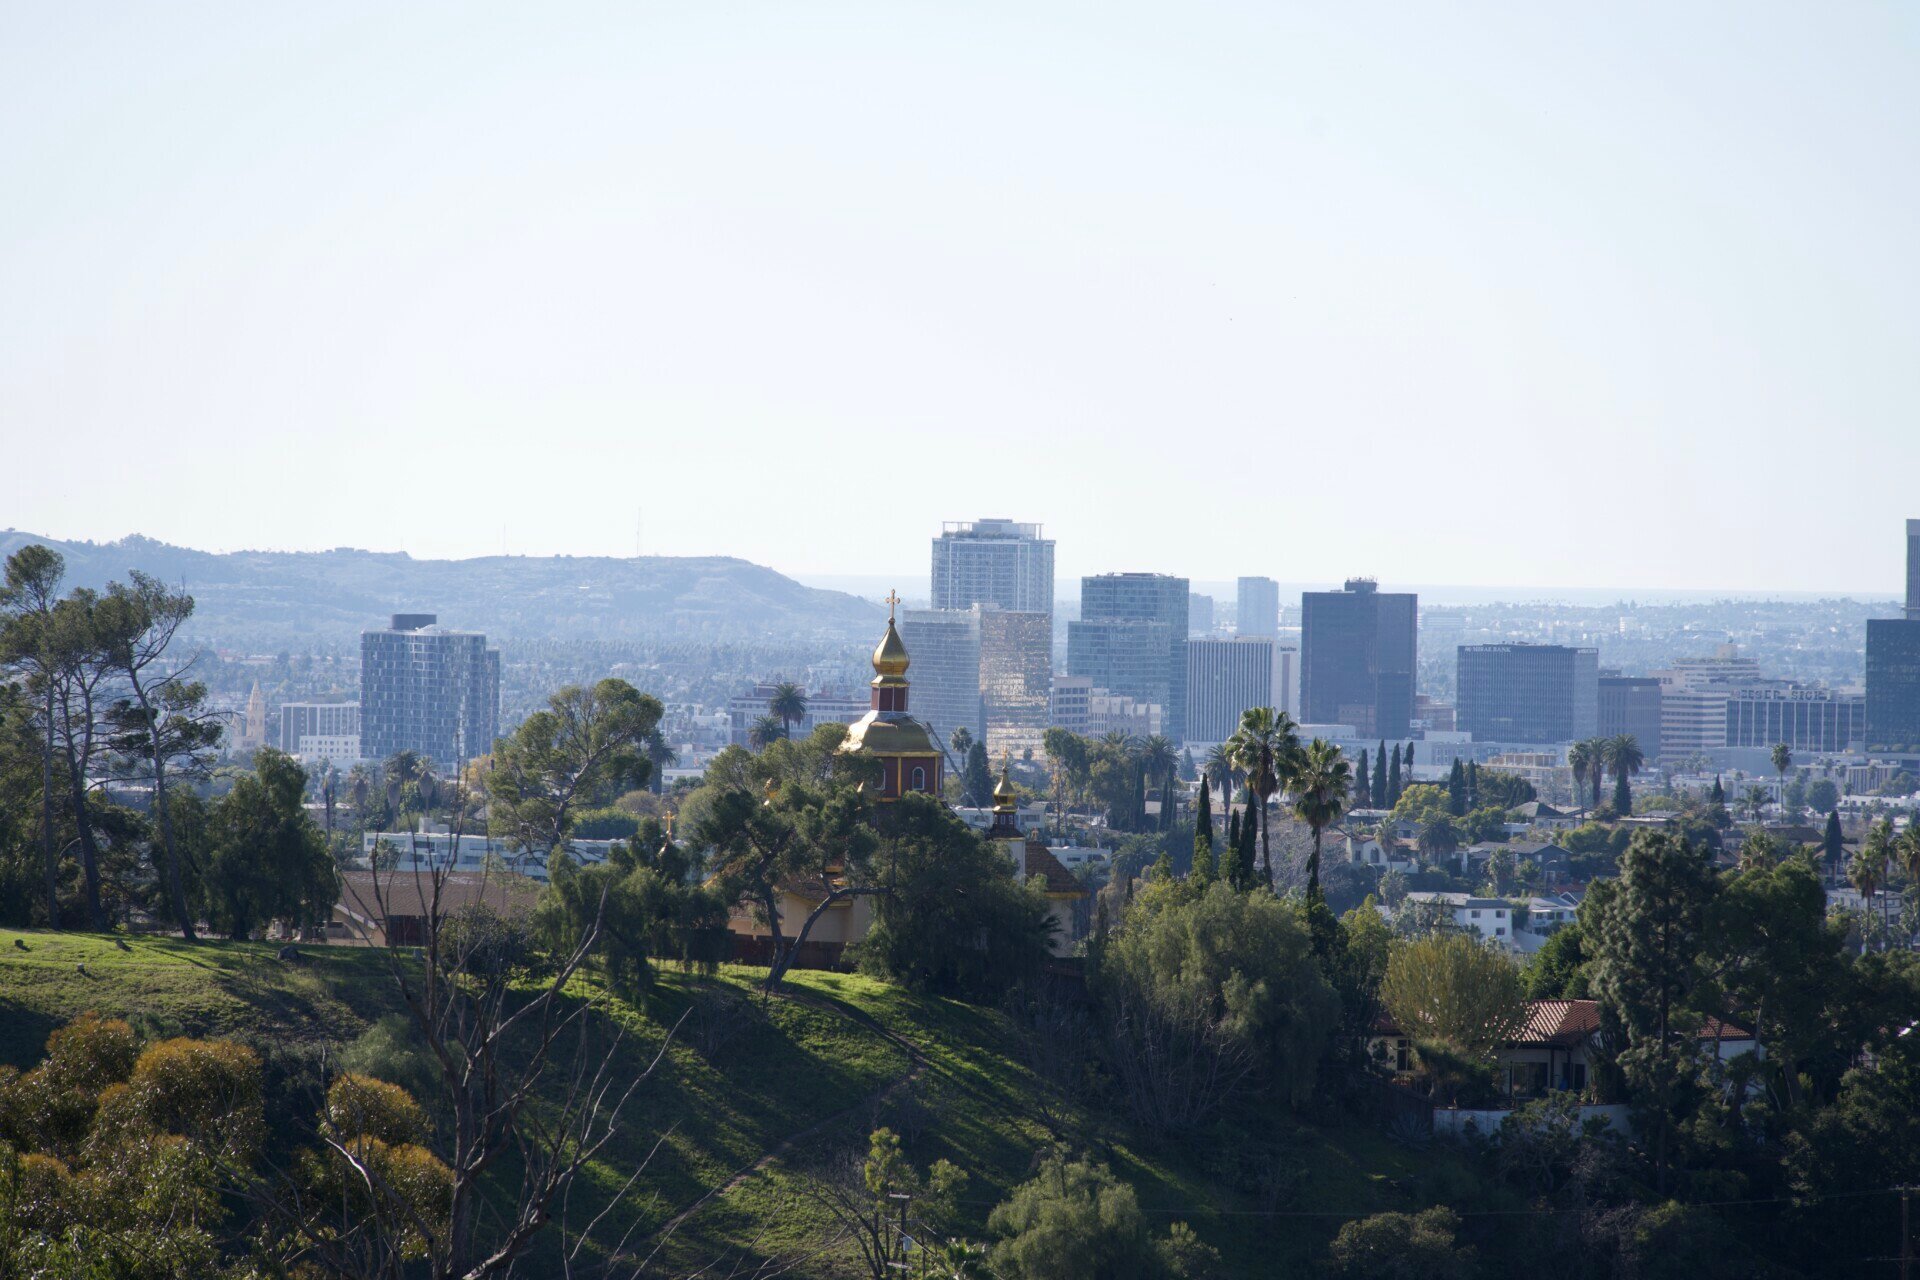 A striking golden dome peeks through the lush greenery of Elysian Park with the Los Angeles skyline in the background